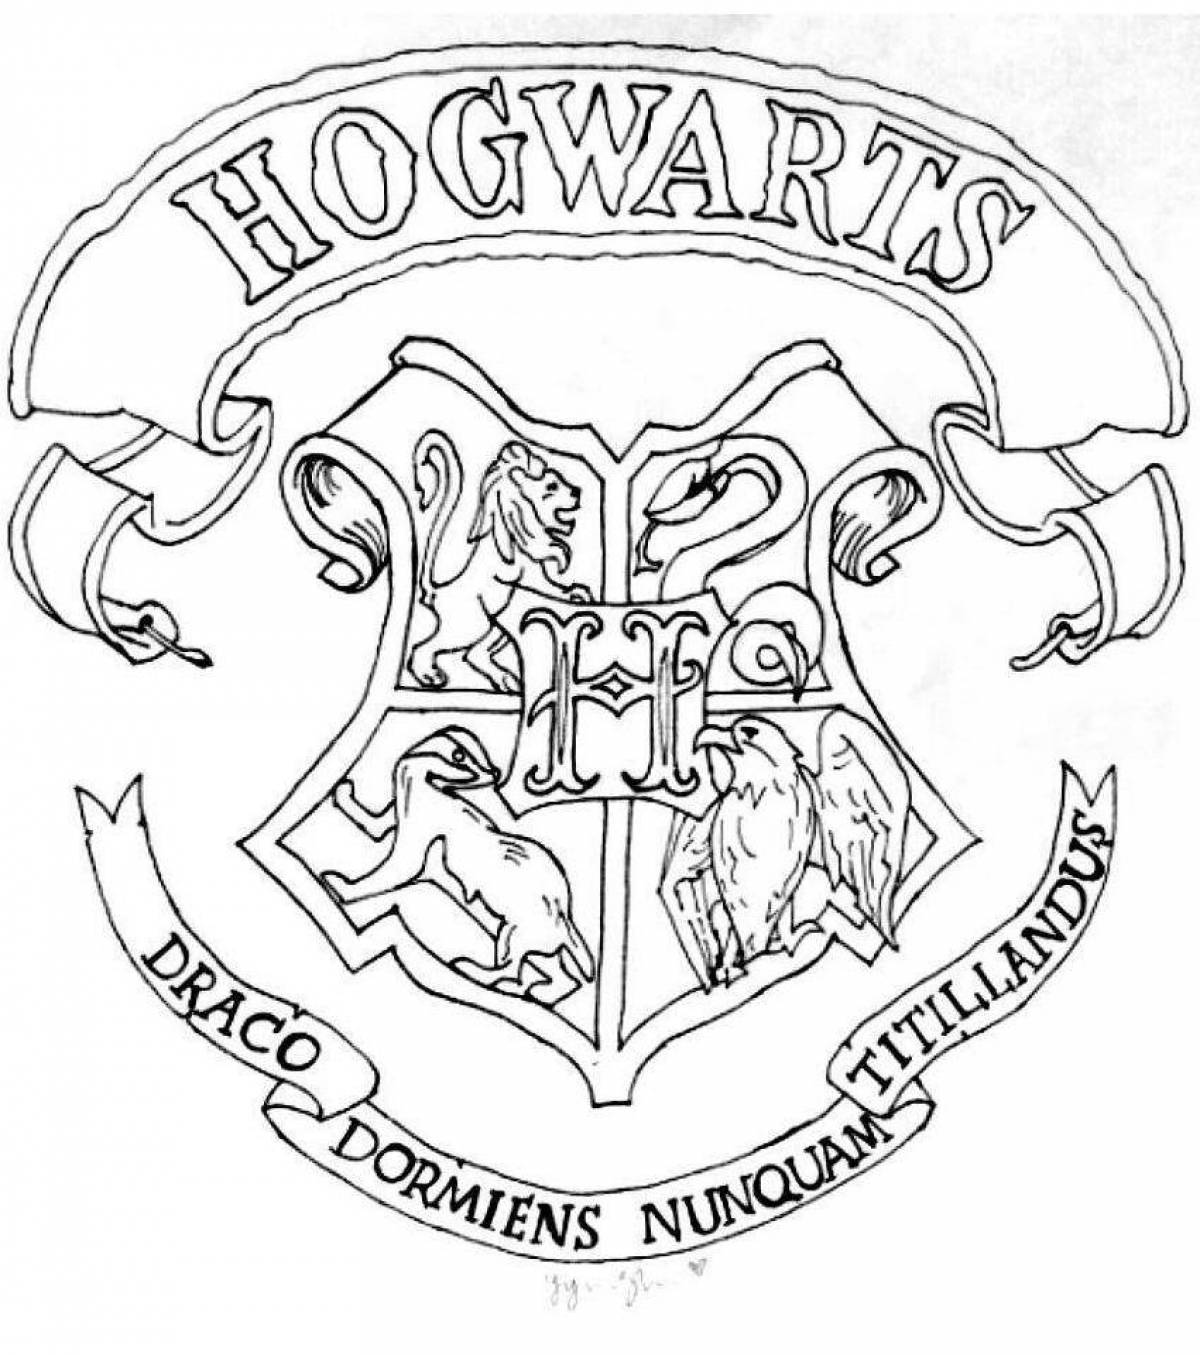 Charming hogwarts coloring page